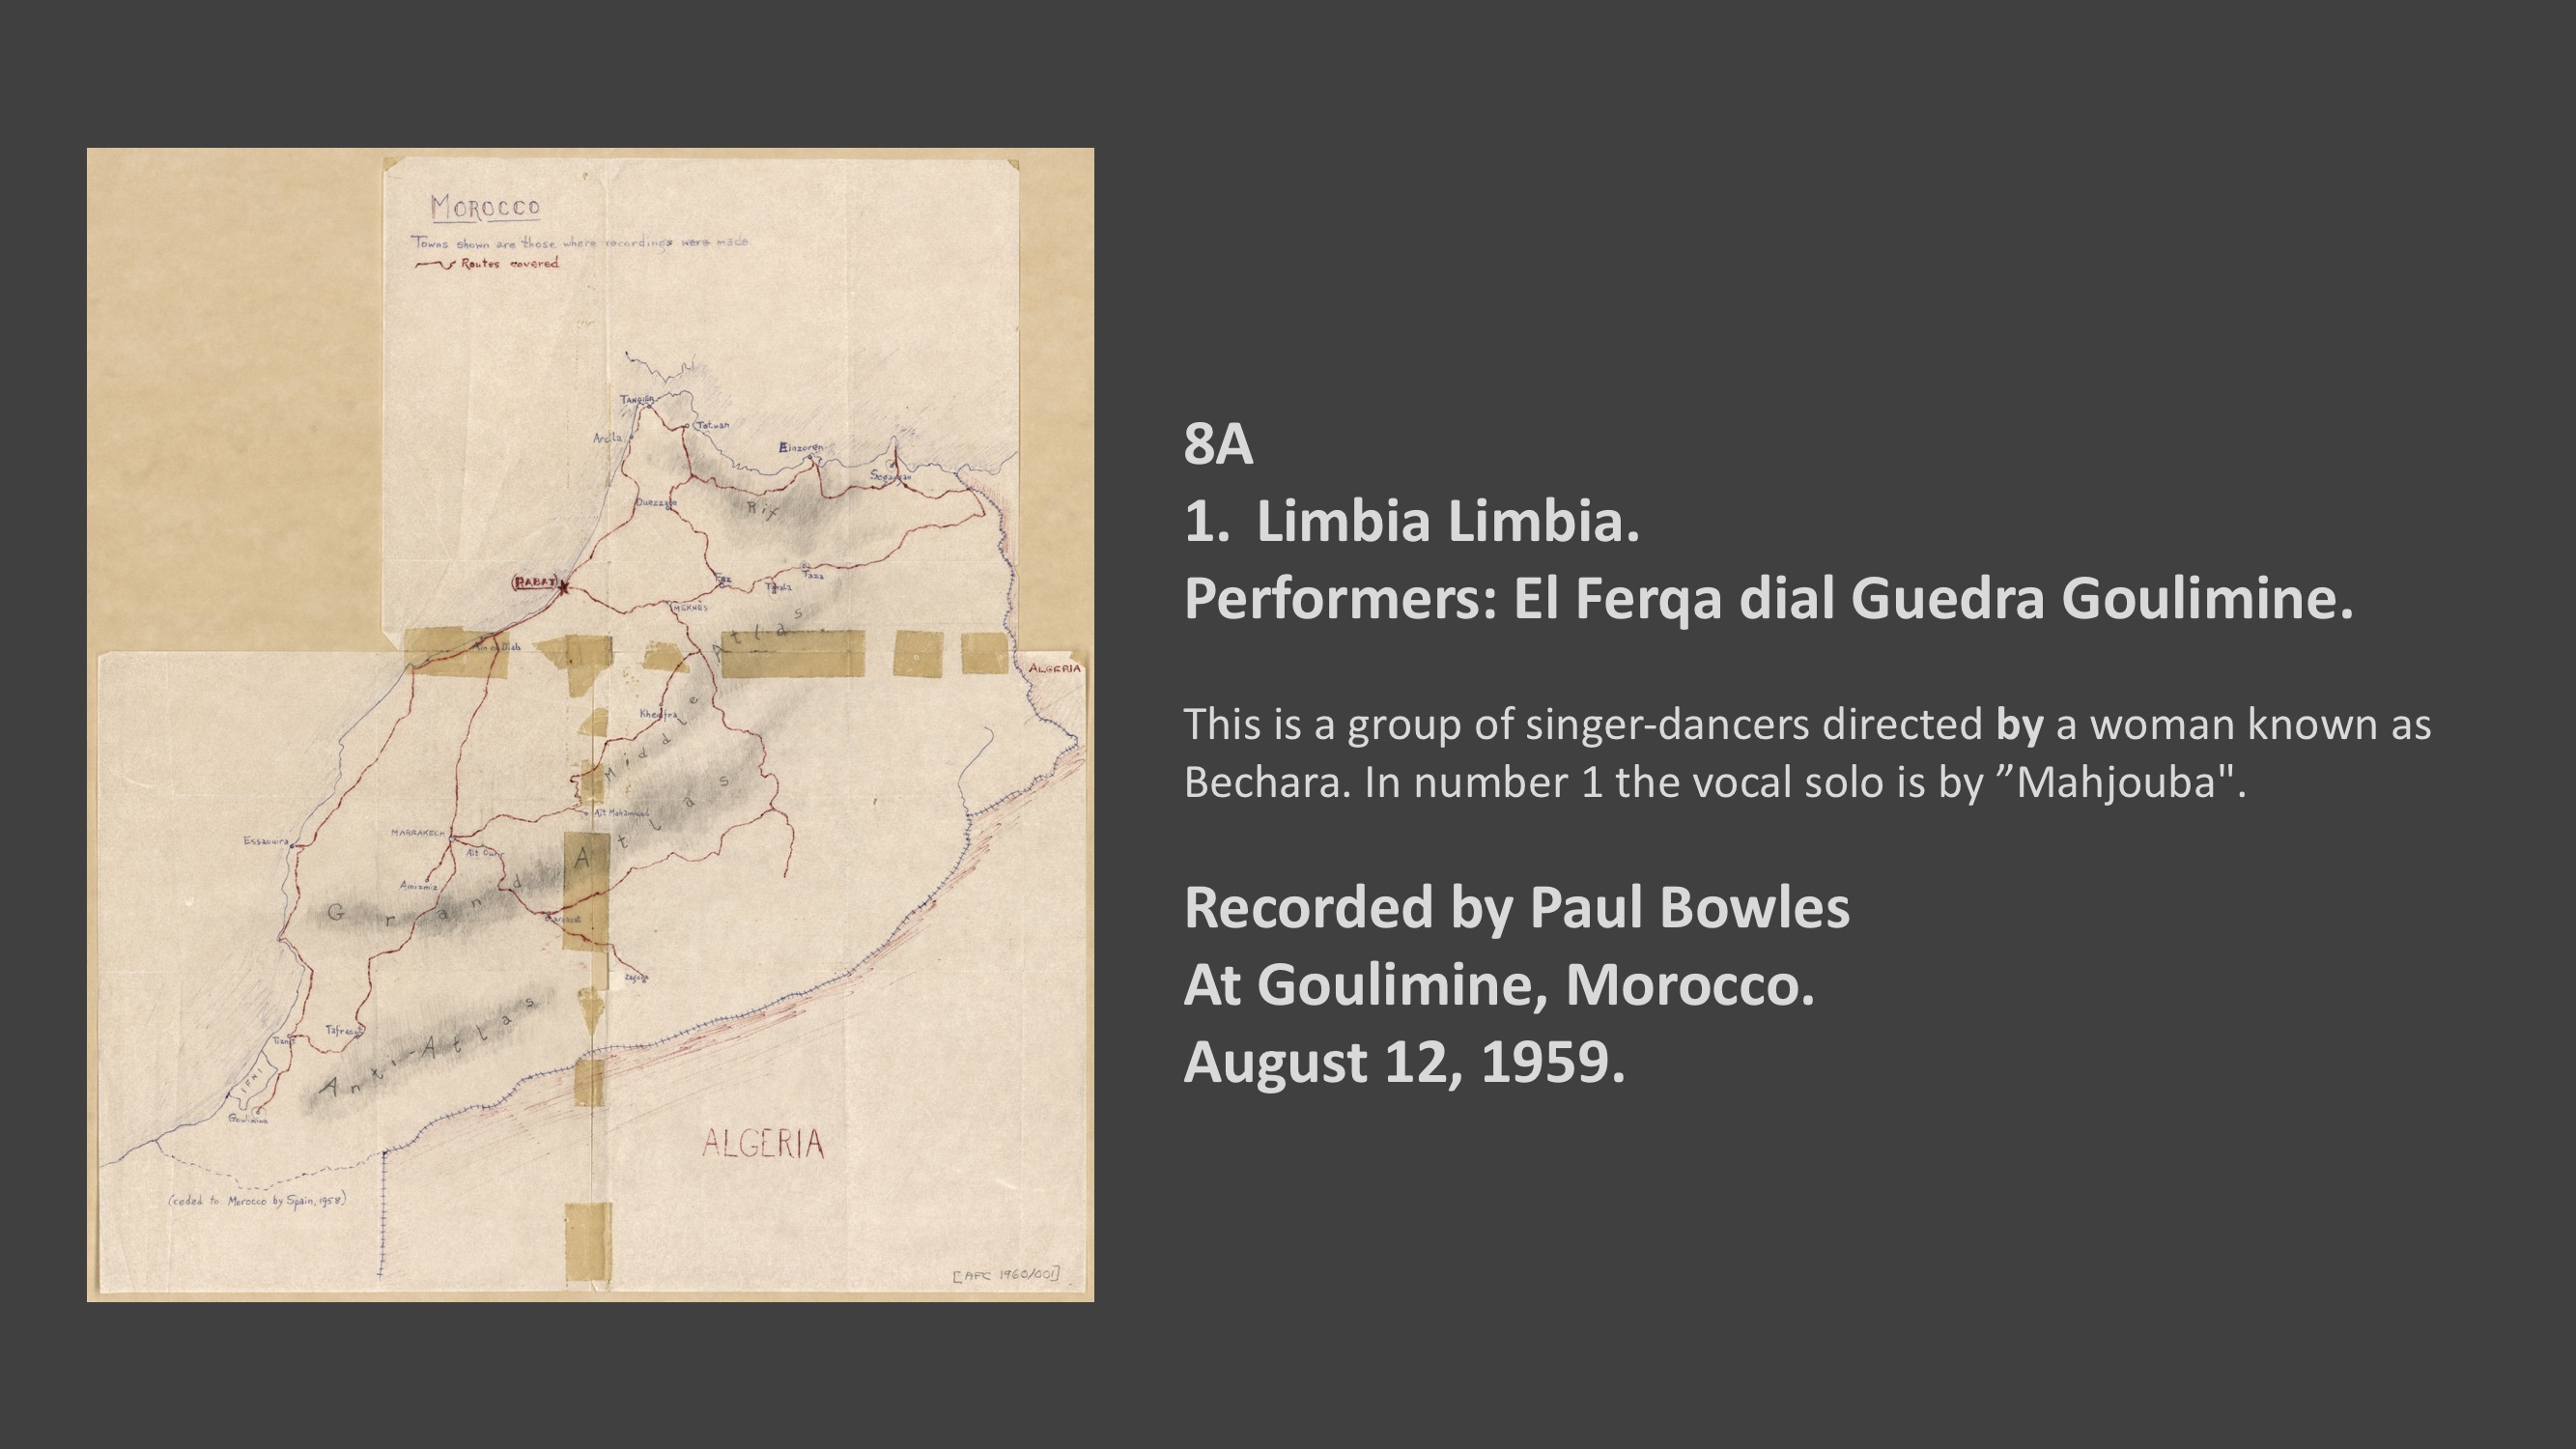  Guelmim - 8A 
Limbia Limbia.
Performers: El Ferqa dial Guedra Goulimine. 

Recorded by Paul Bowles at Goulimine, Moroccan Sahara.
August 12, 1959
